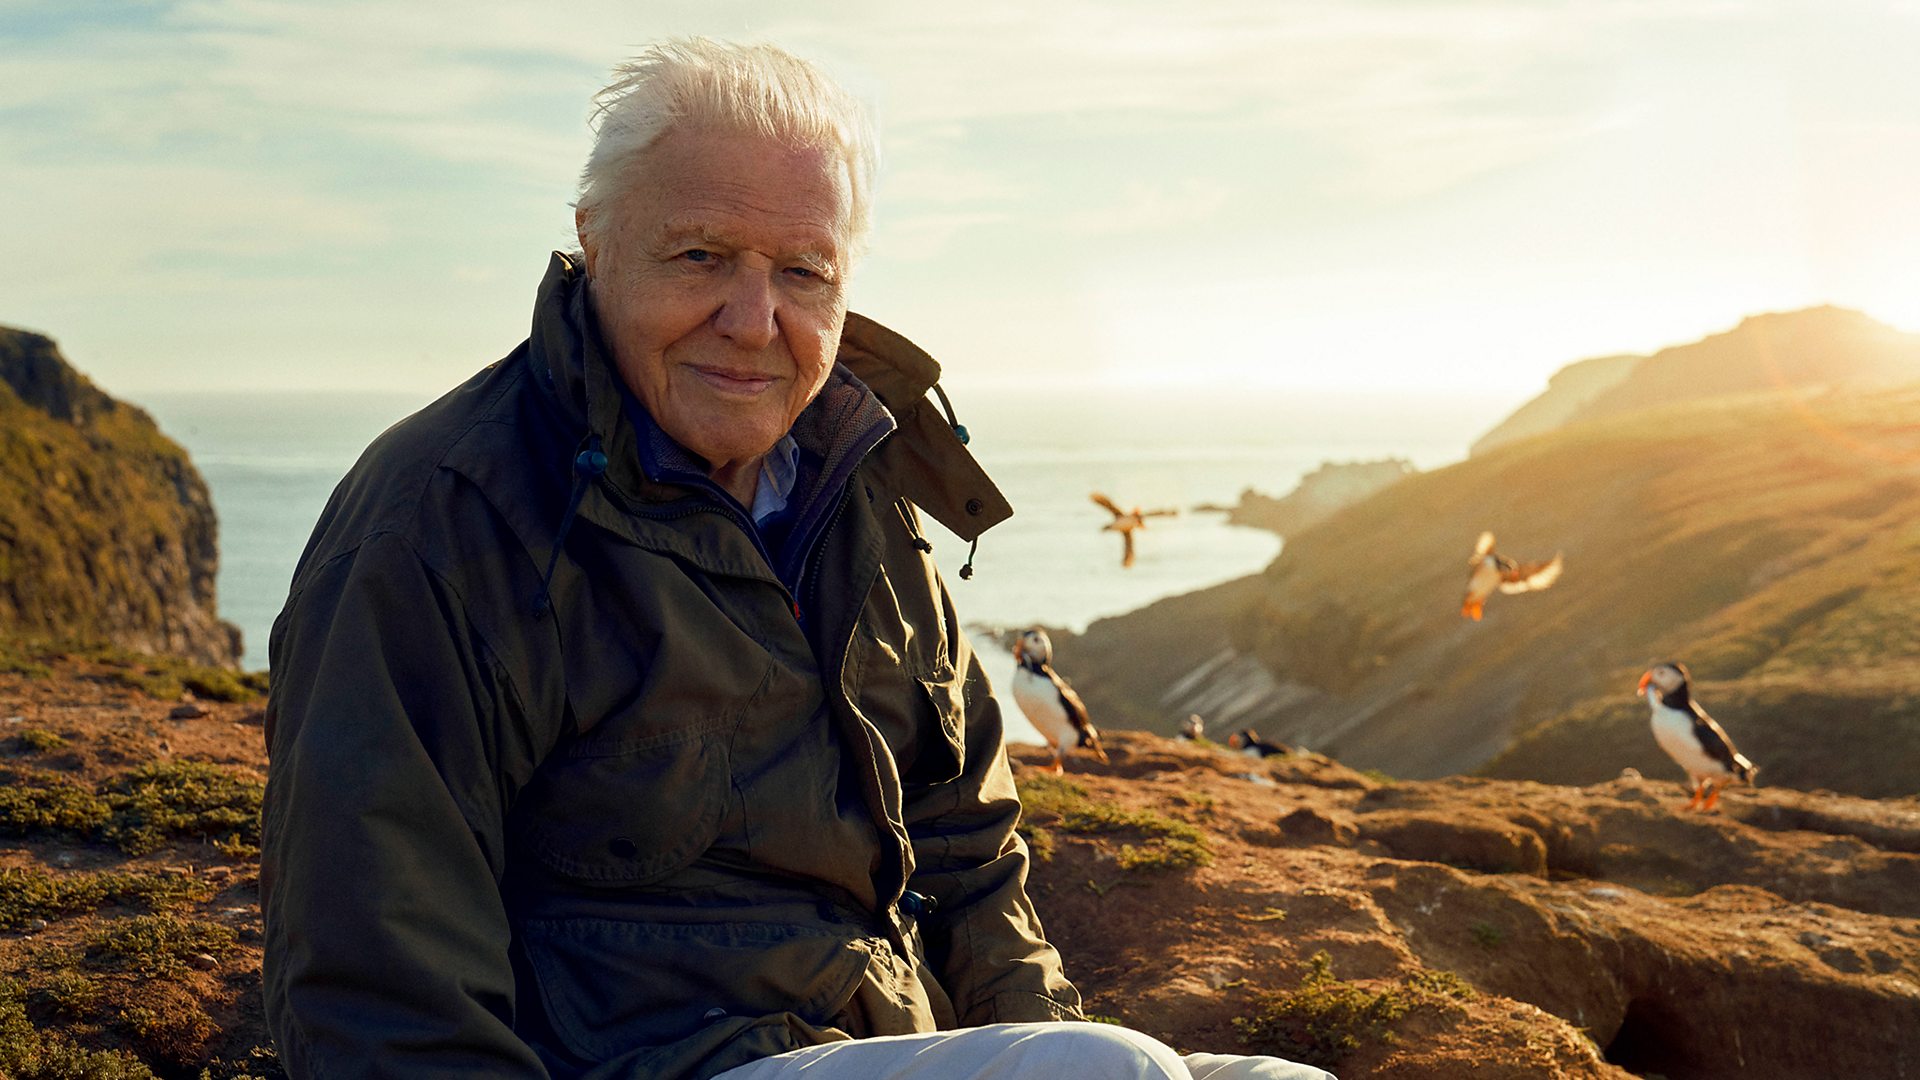 Watch the trailer for Wild Isles presented by Sir David Attenborough